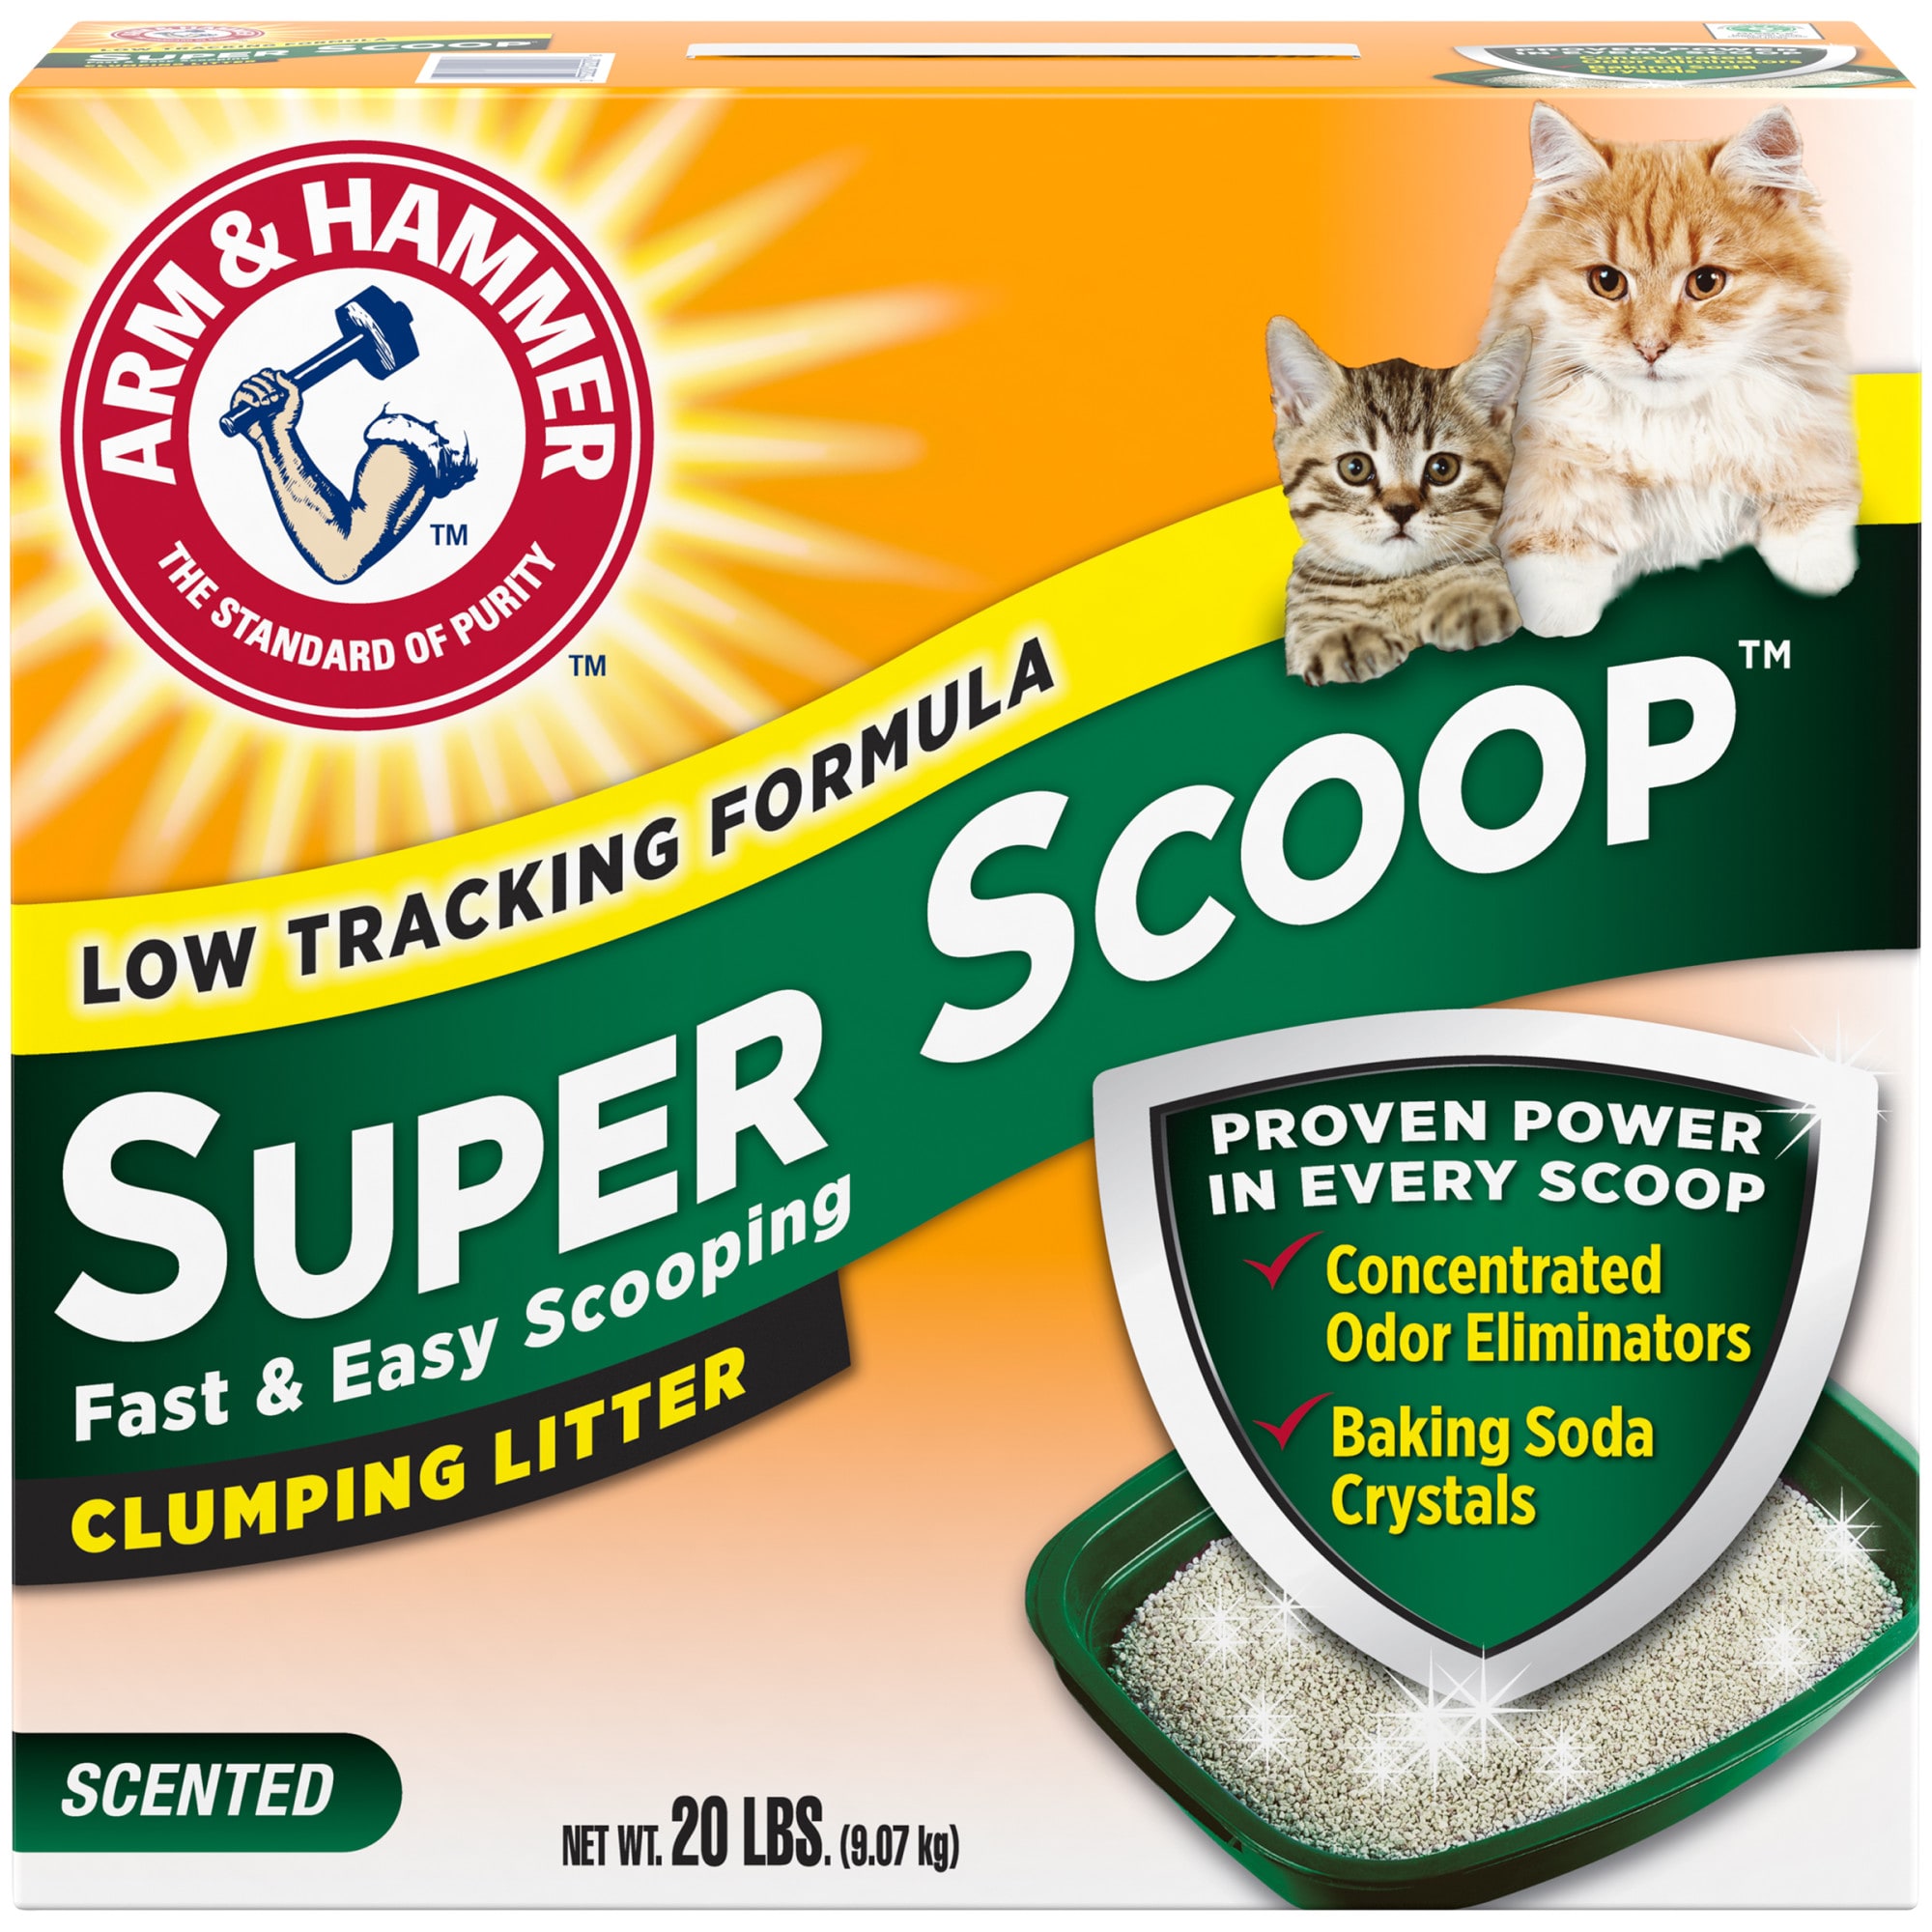 UPC 033200022008 product image for Arm & Hammer Super Scoop Clumping Litter for Cats, 20 lbs. | upcitemdb.com